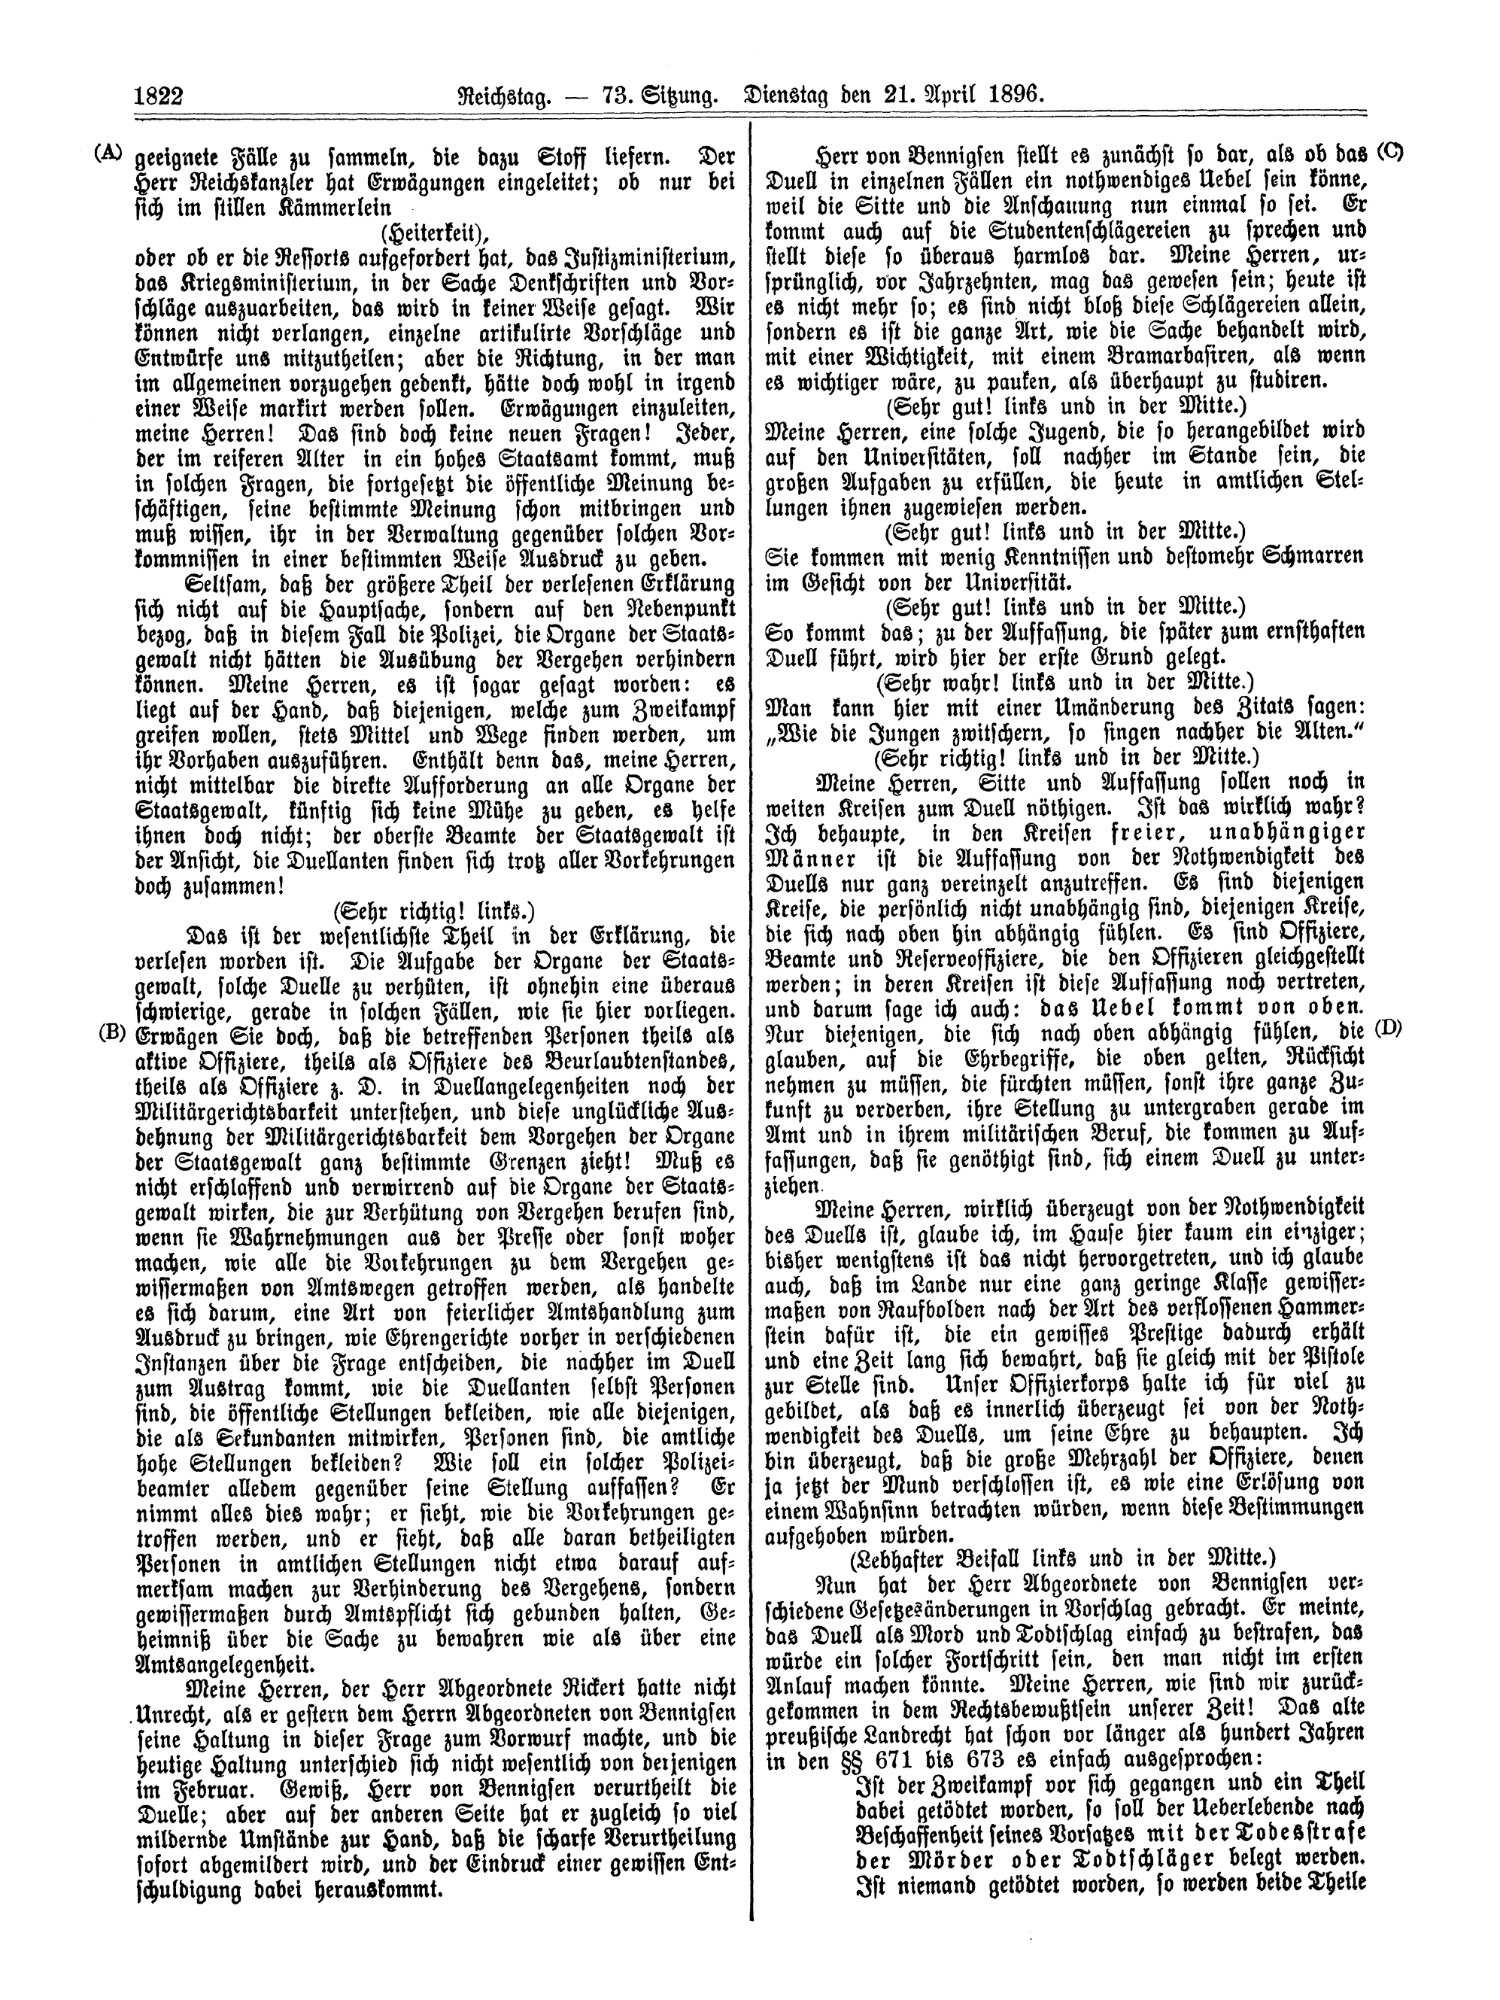 Scan of page 1822